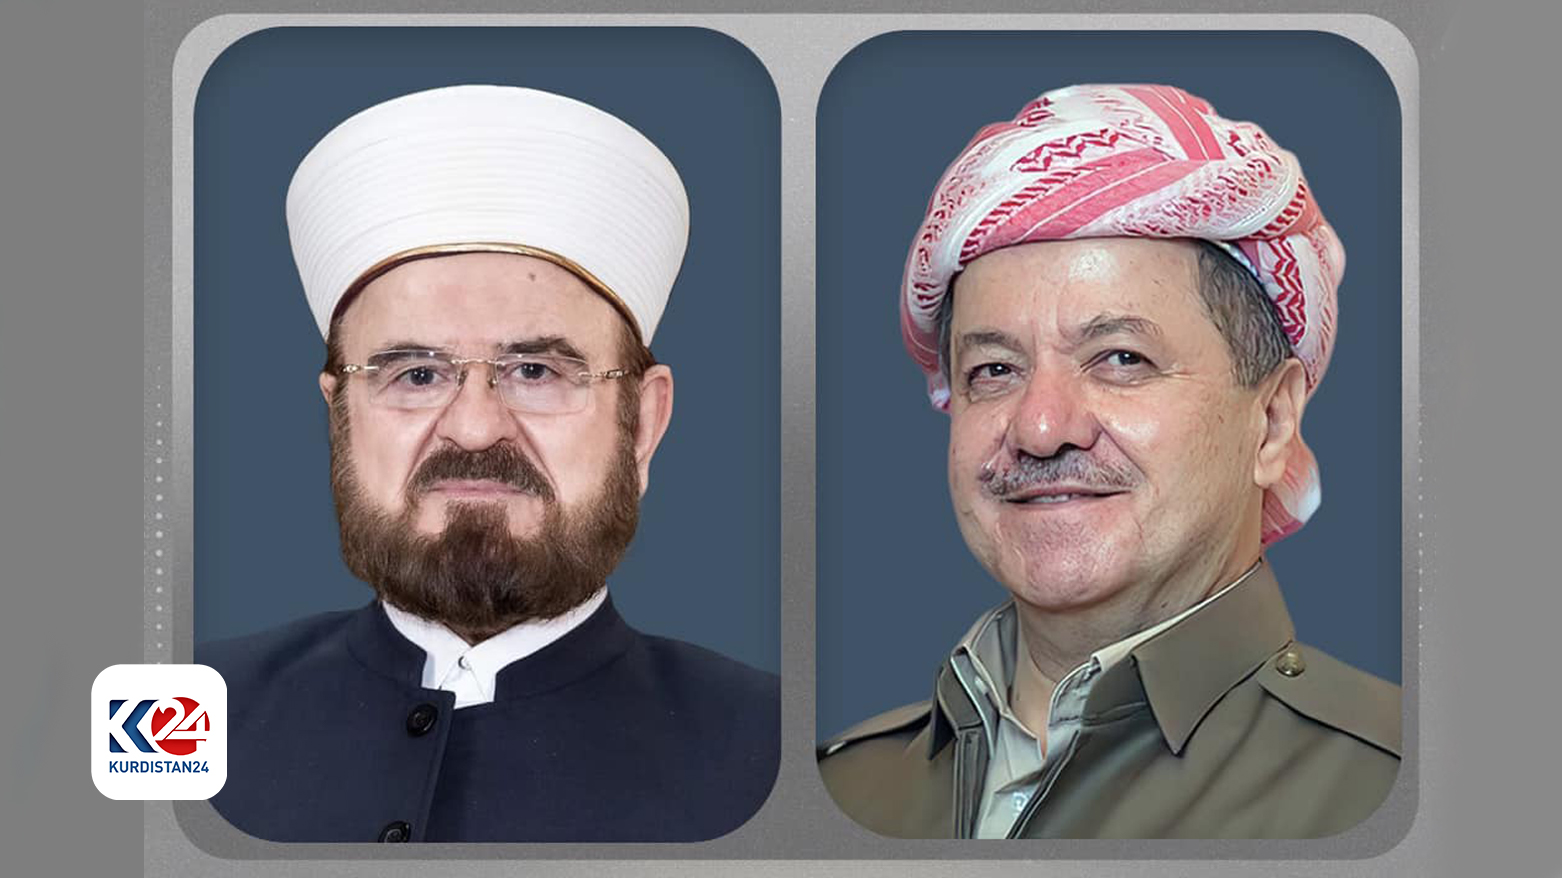 Combined photos of KDP President Masoud Barzani (right) and newly elected head of IUMS Ali Qaradaghi. (Designed by Kurdistan24)